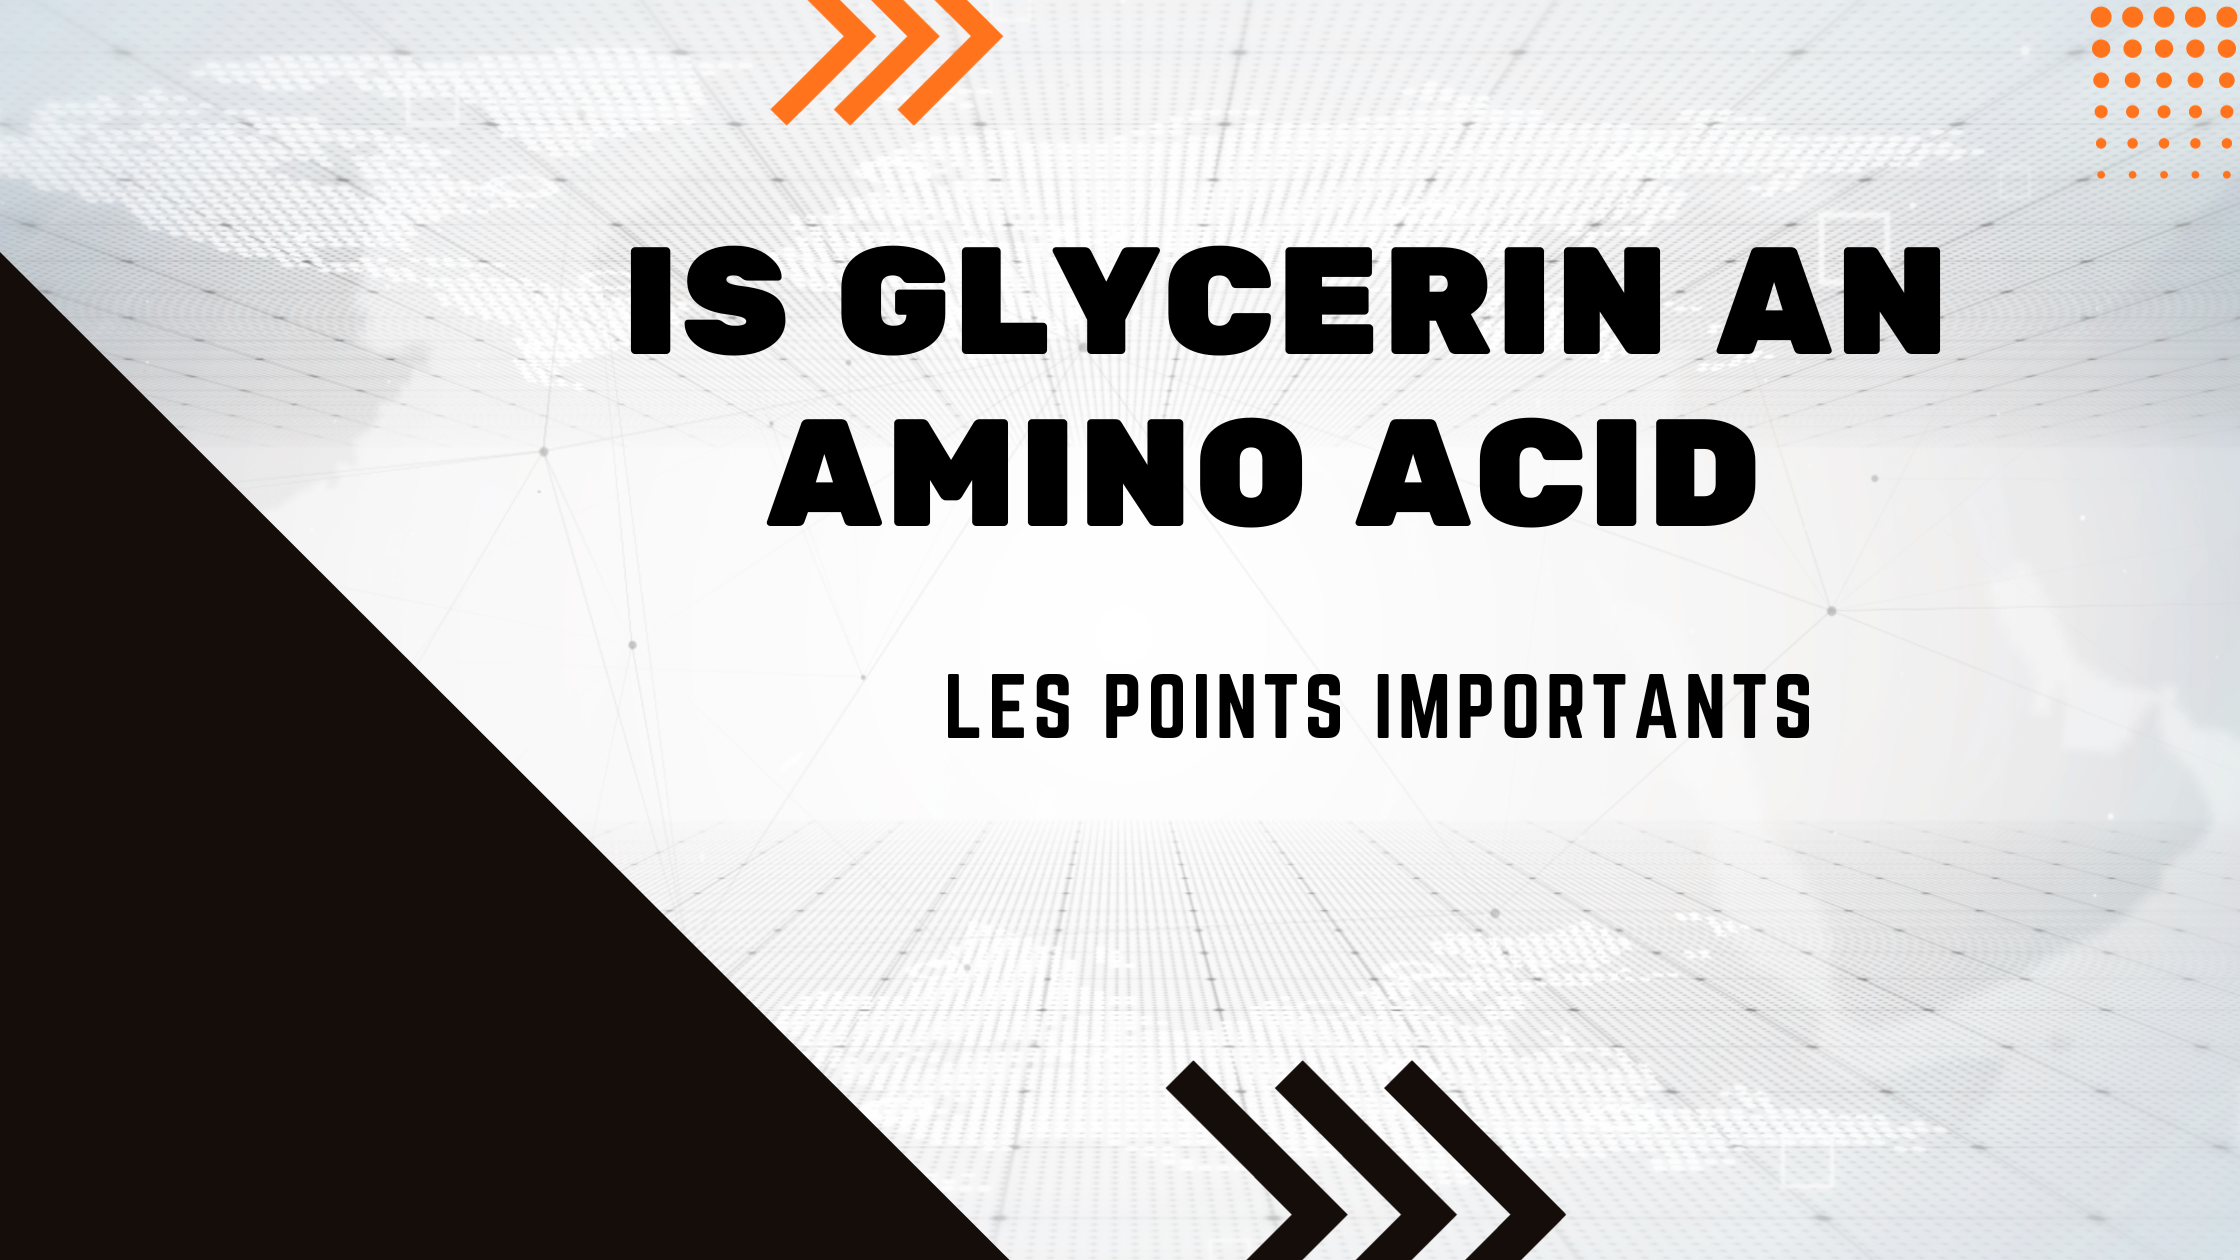 is glycerin an amino acid | Les points importants